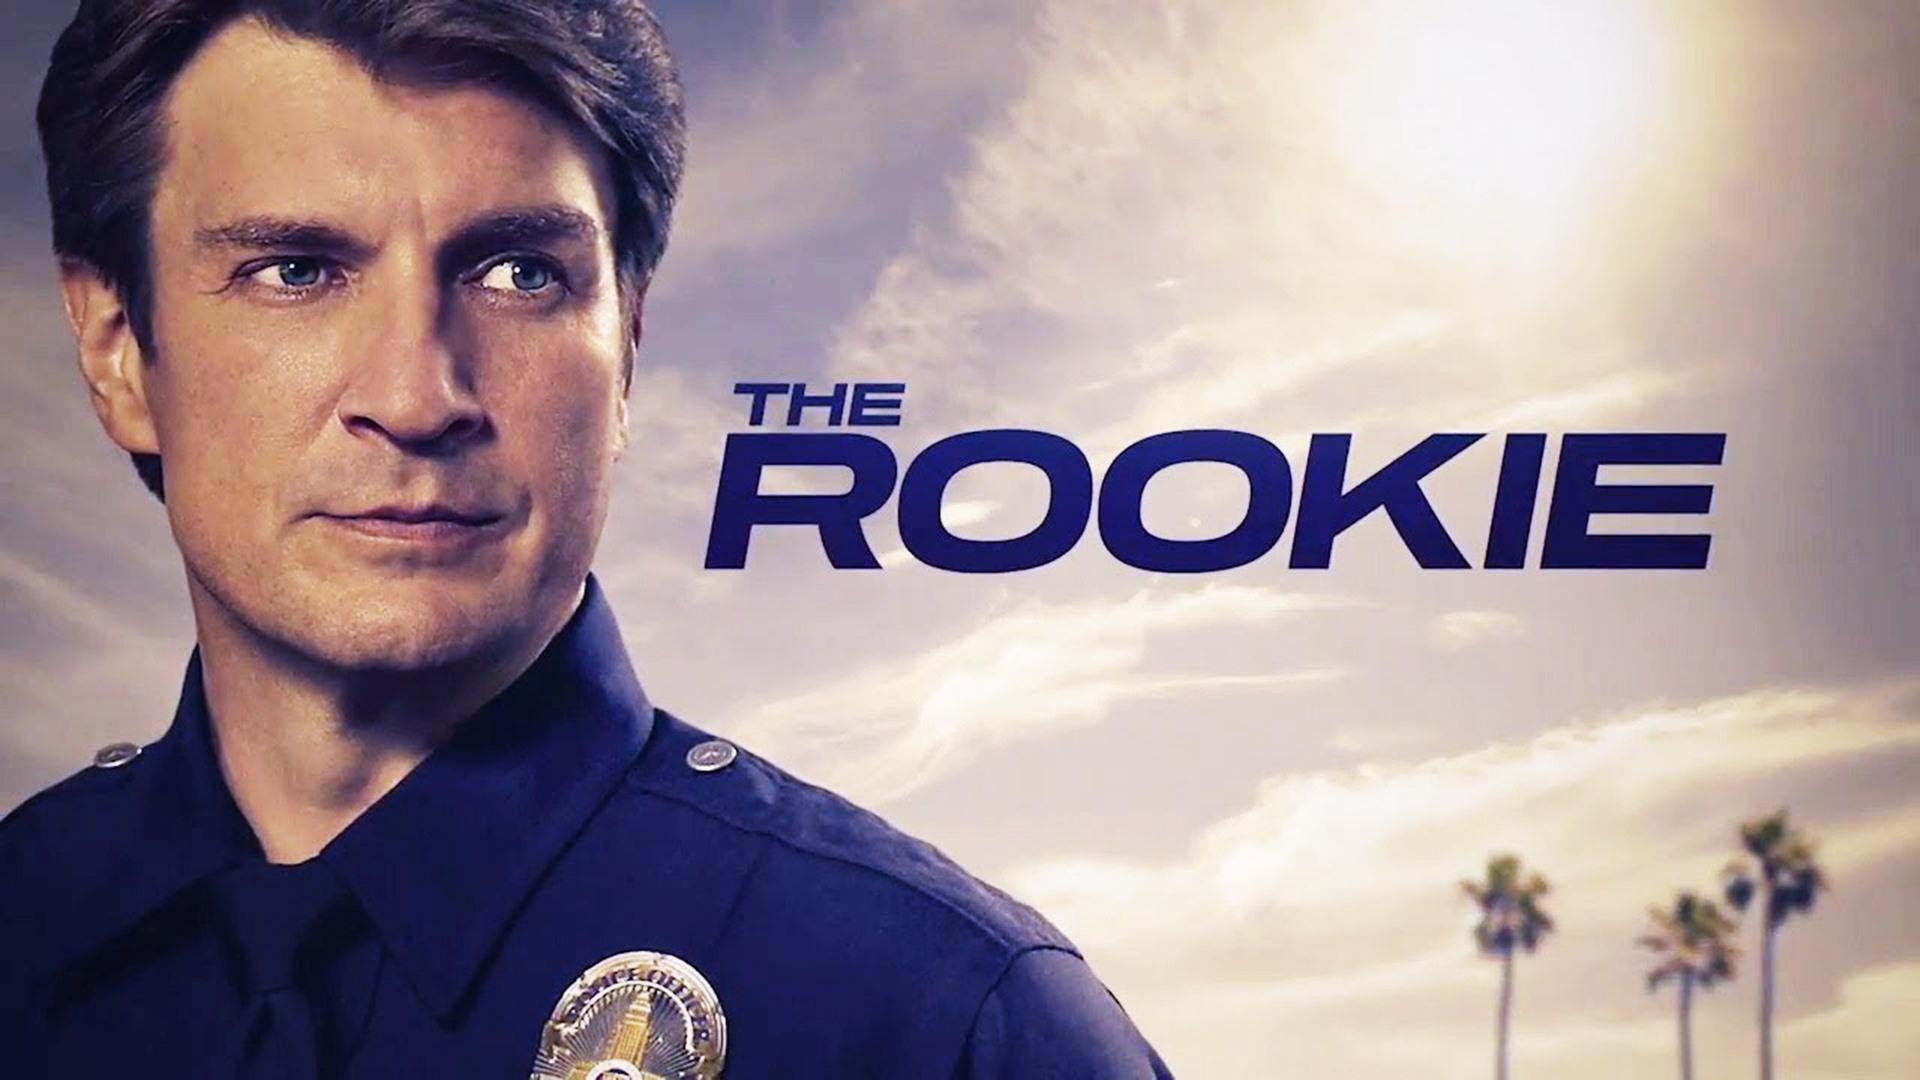 ABC The Rookie High Definition Wallpaper 39107